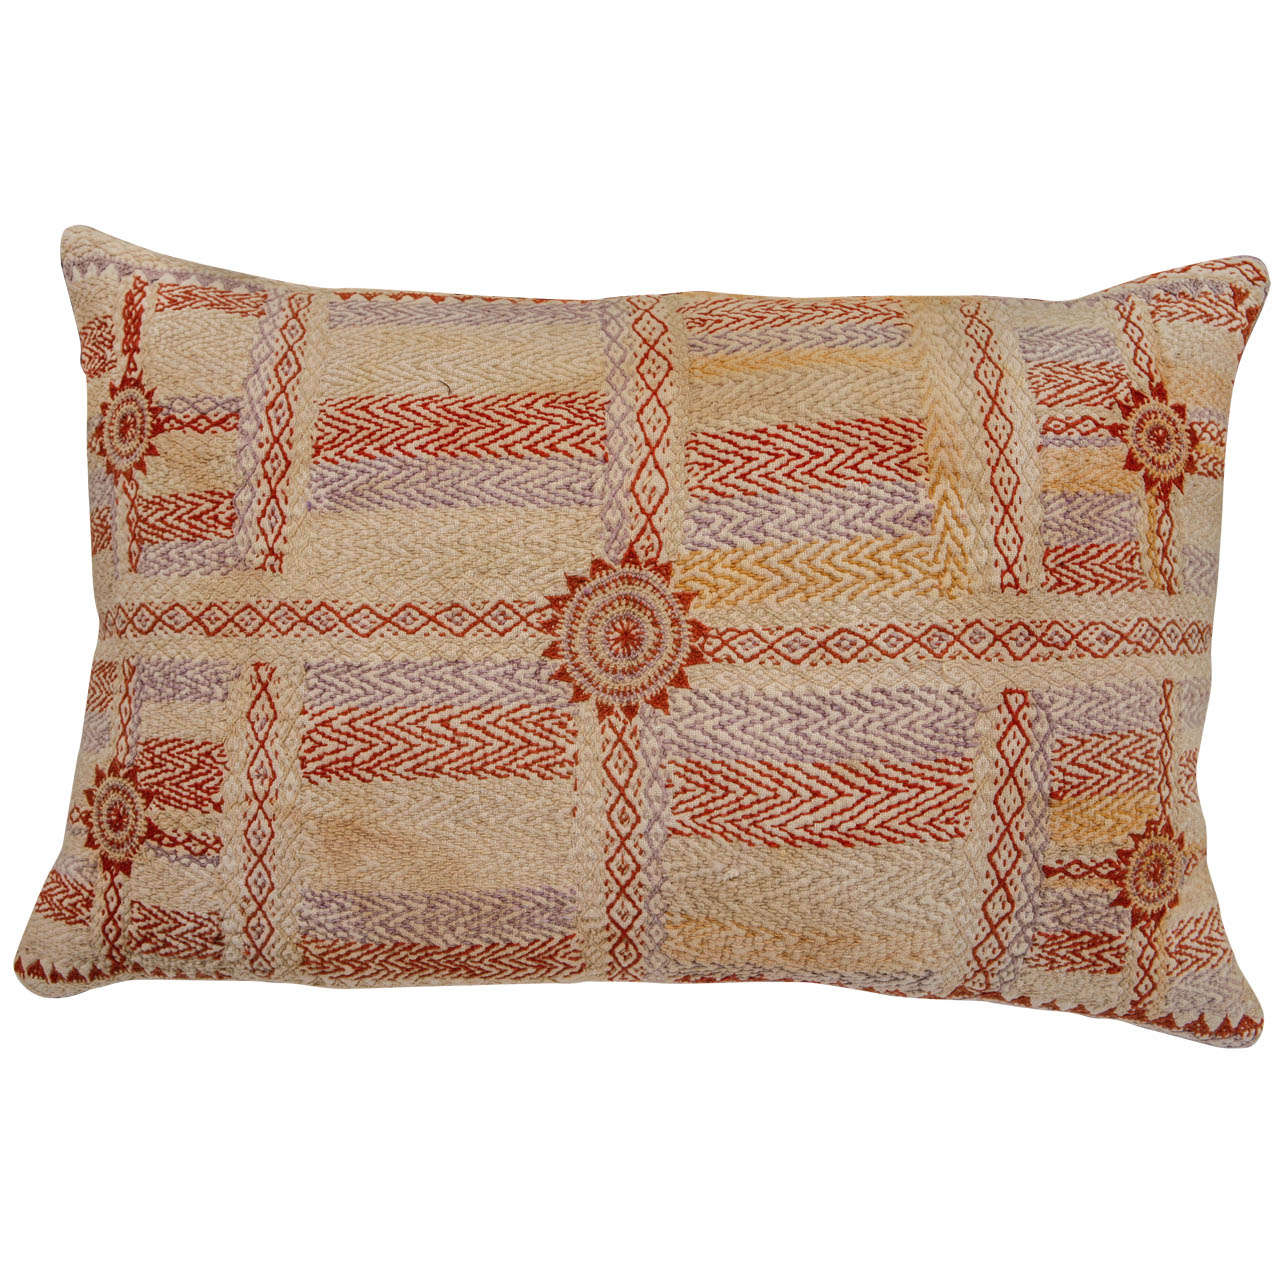 Quilted & Embroidered Banjara Linen Pillow